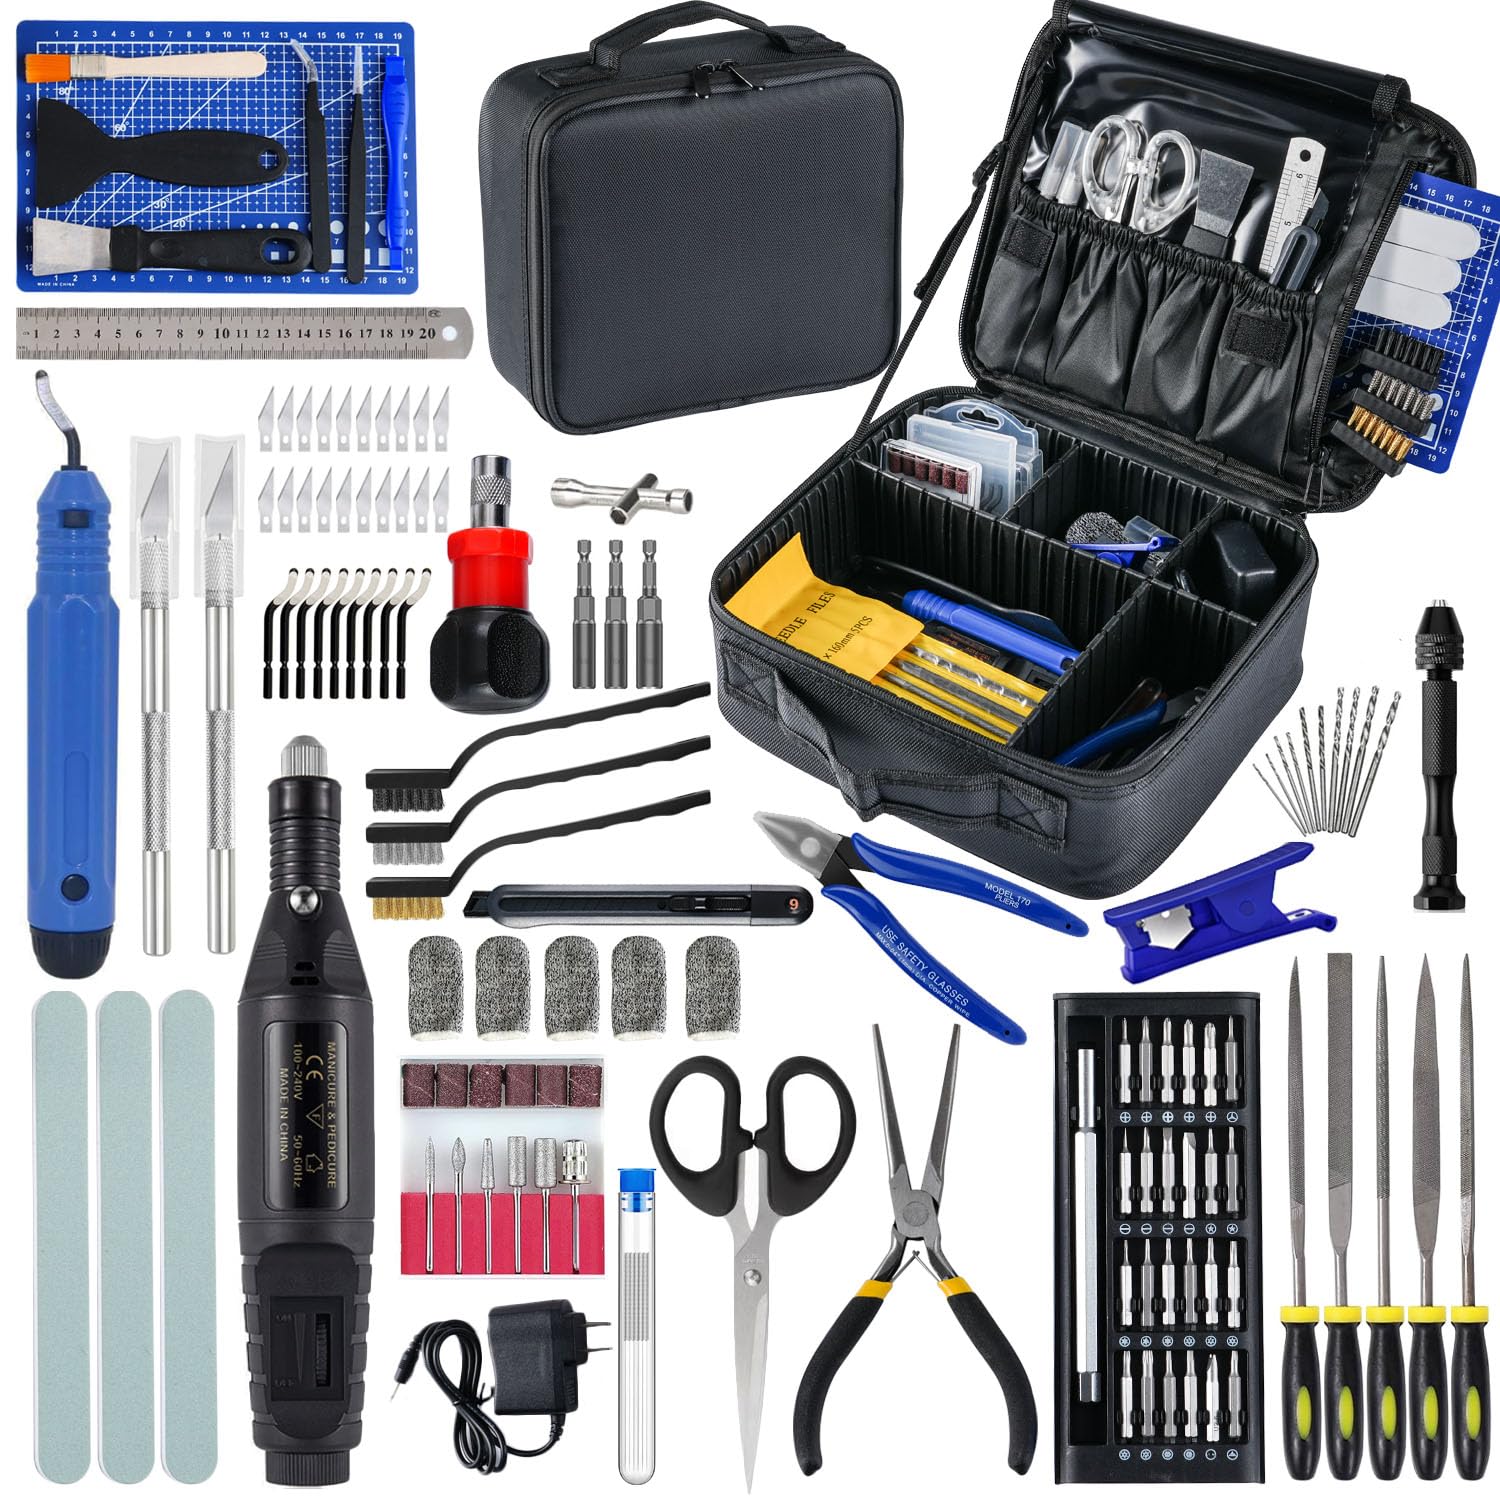 124pcs-3d-printing-accessory-tools-with-tool-bag-for-3d-printer-modeler-basic-tools-diverse-3d-print-nozzle-cleaning-kit 124Pcs 3D Printing Accessory Tools Review